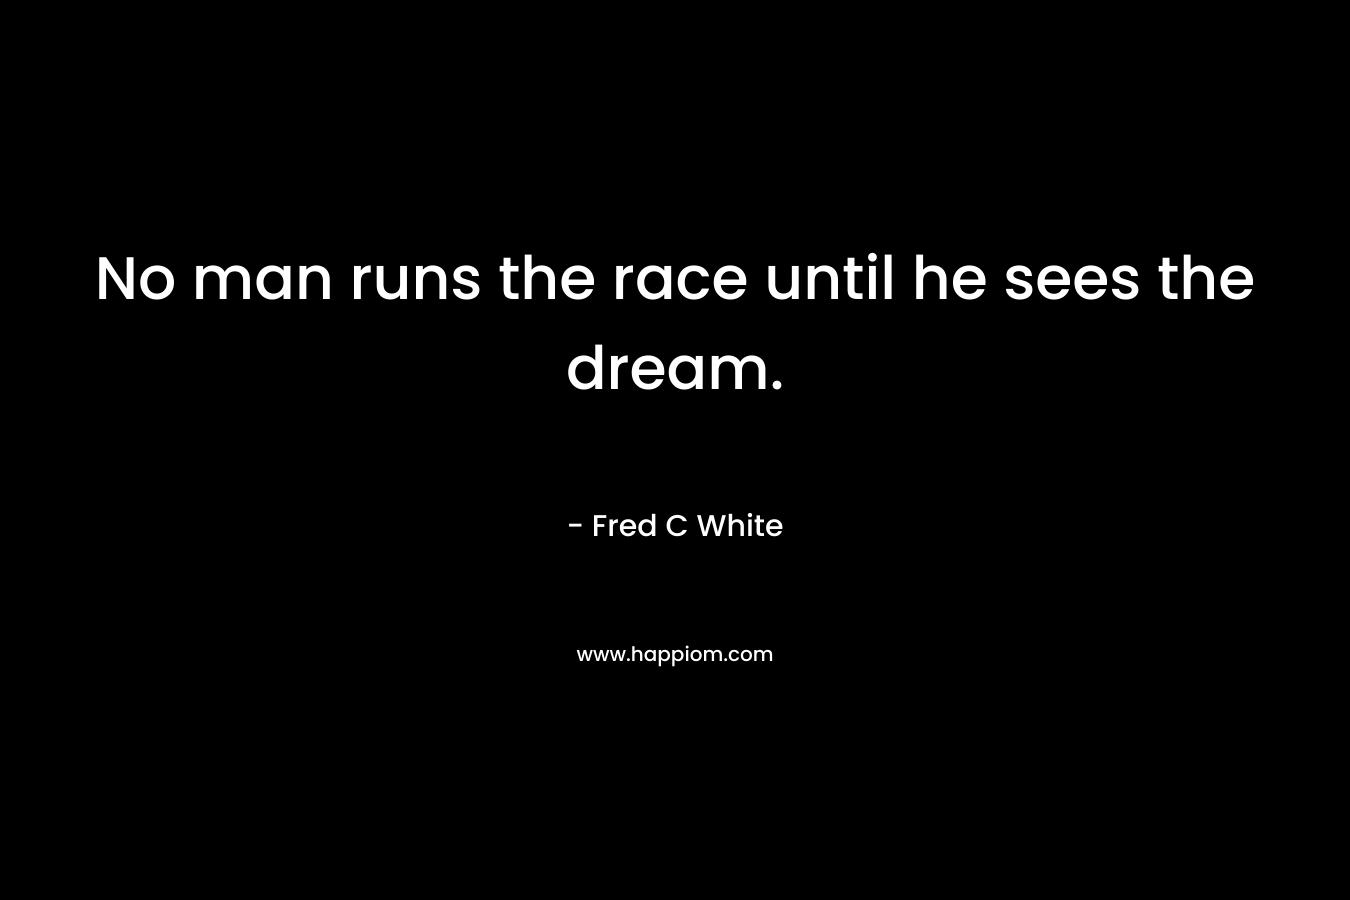 No man runs the race until he sees the dream.